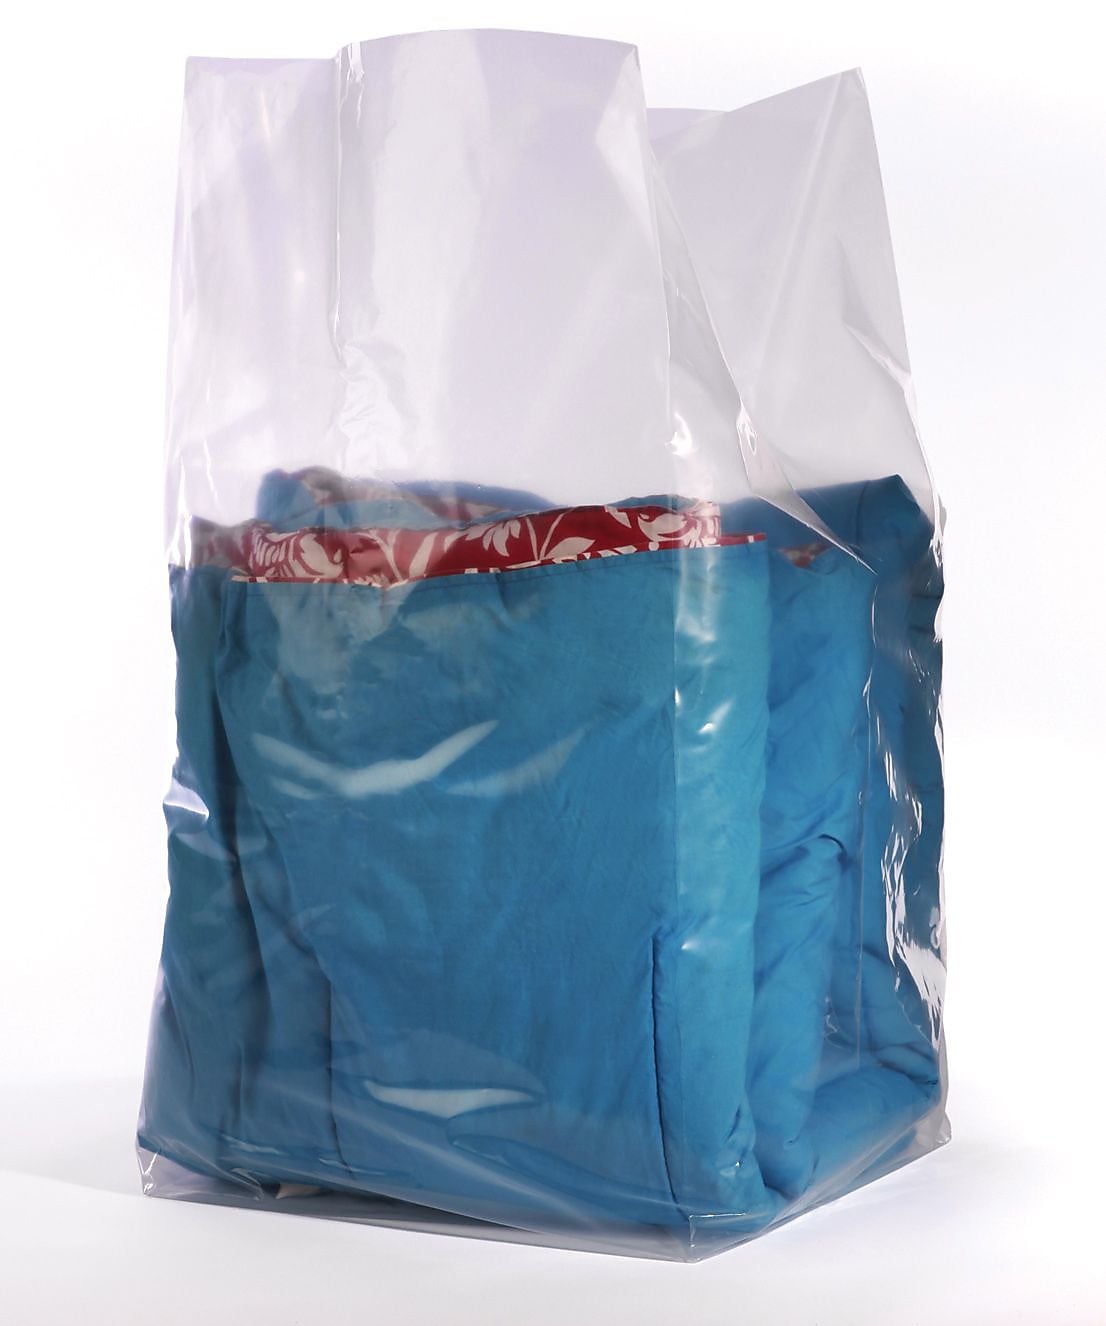 16" x 10" x 32" Gusseted Poly Bags, 2 Mil, Clear, 250/Carton